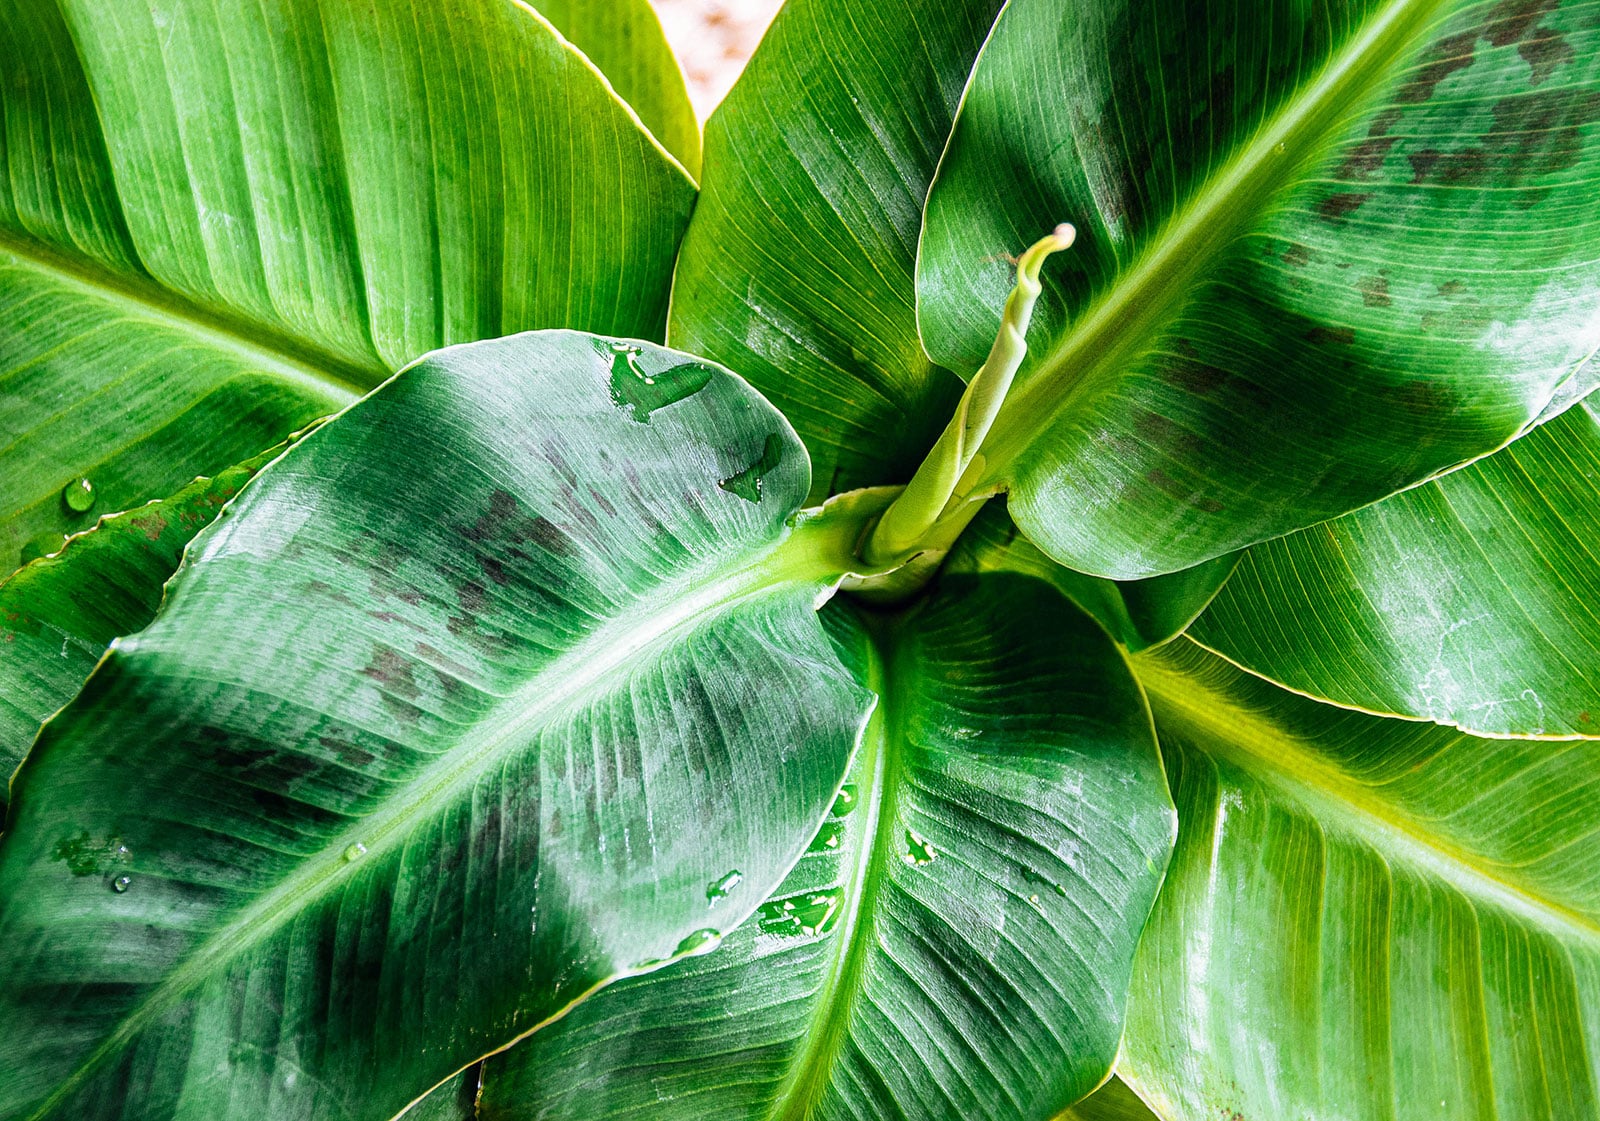 Grow your own banana plant indoors or outdoors: all the tips and tricks